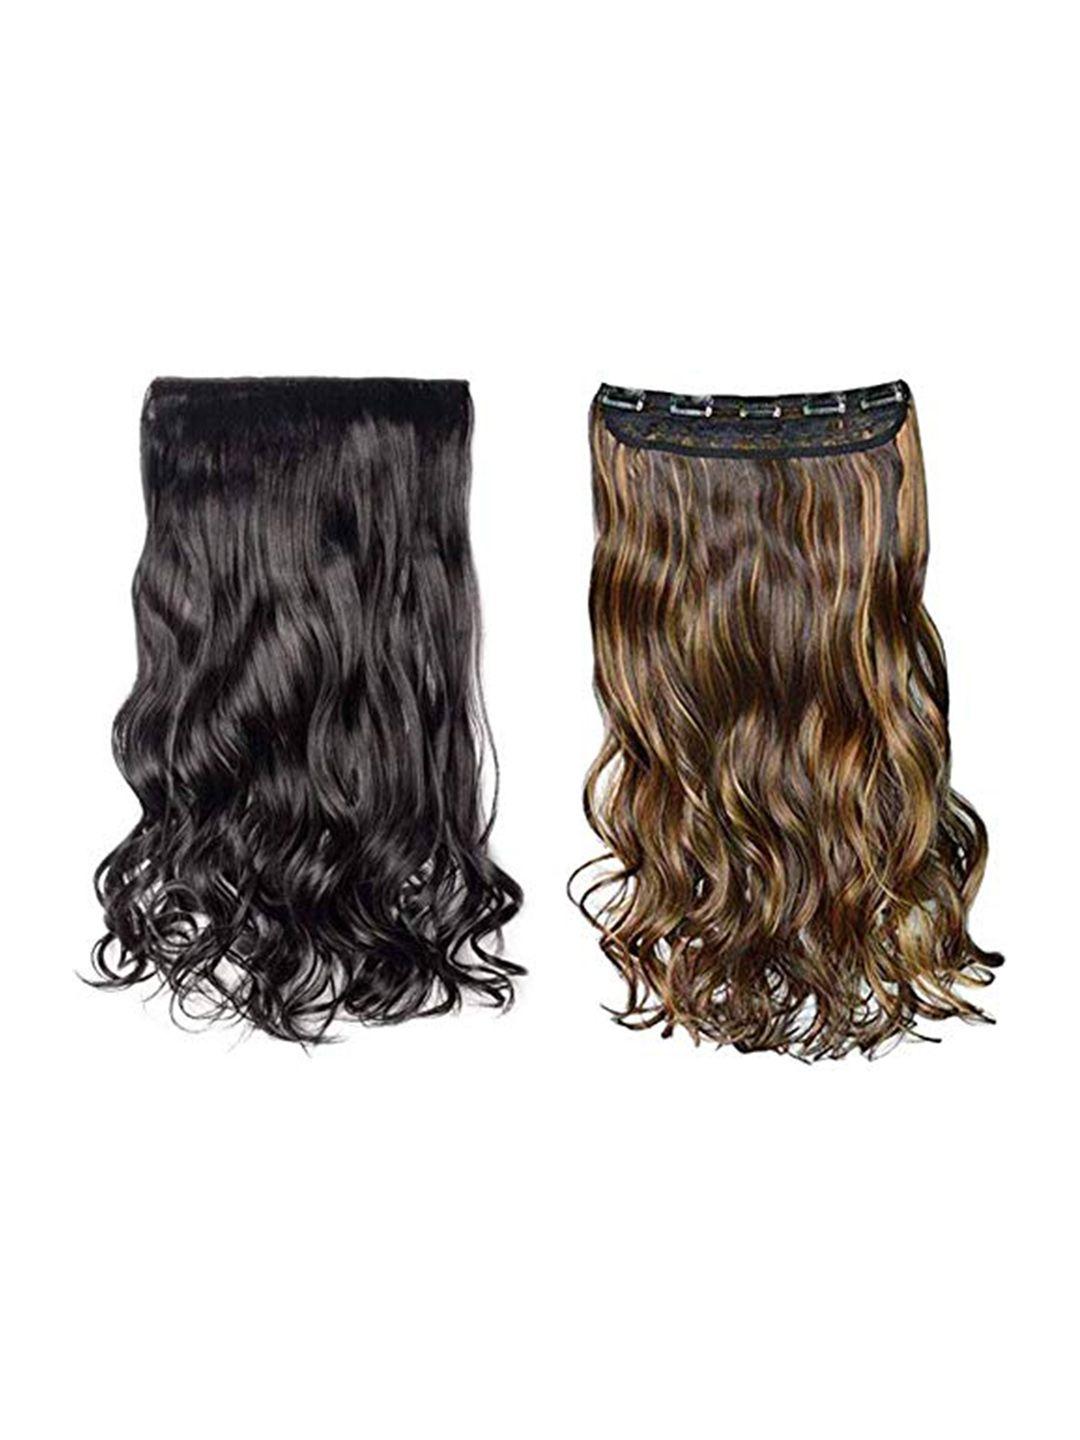 chronex set of 2 clip based highlighted curly/wavy hair extension